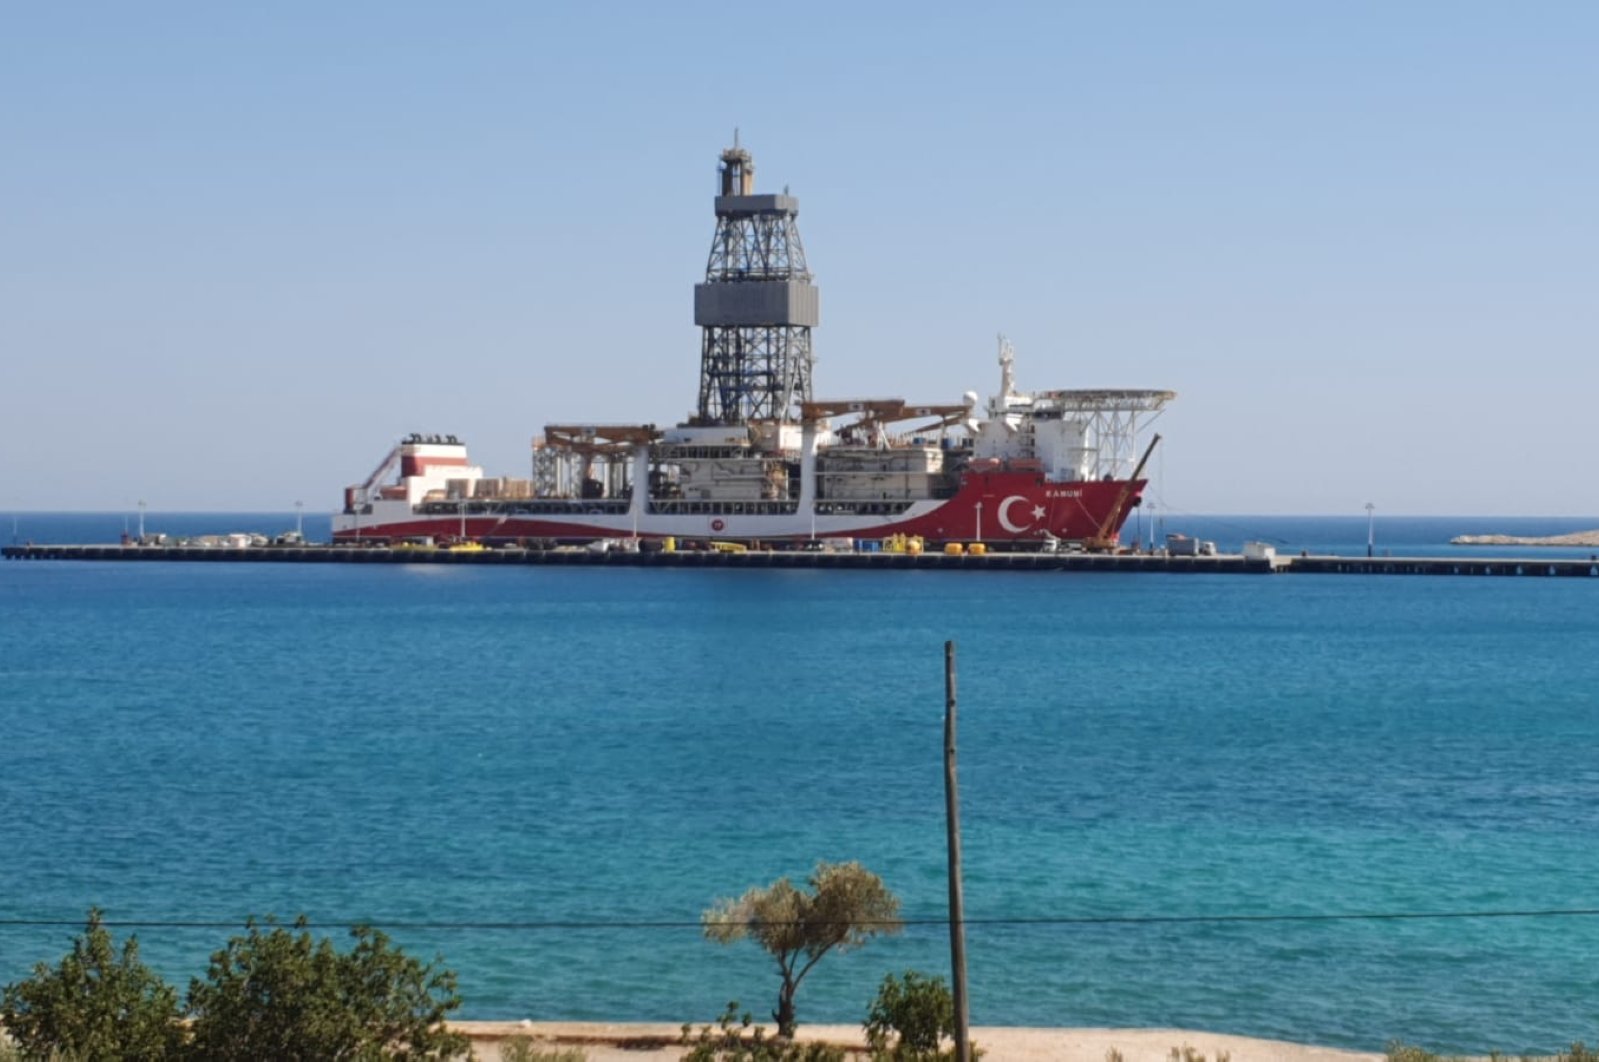 Turkey's third drillship Kanuni docked at the NATO port in Incekum in the Silifke district of Mersin province, southern Turkey, Sept. 11, 2020. (DHA Photo)